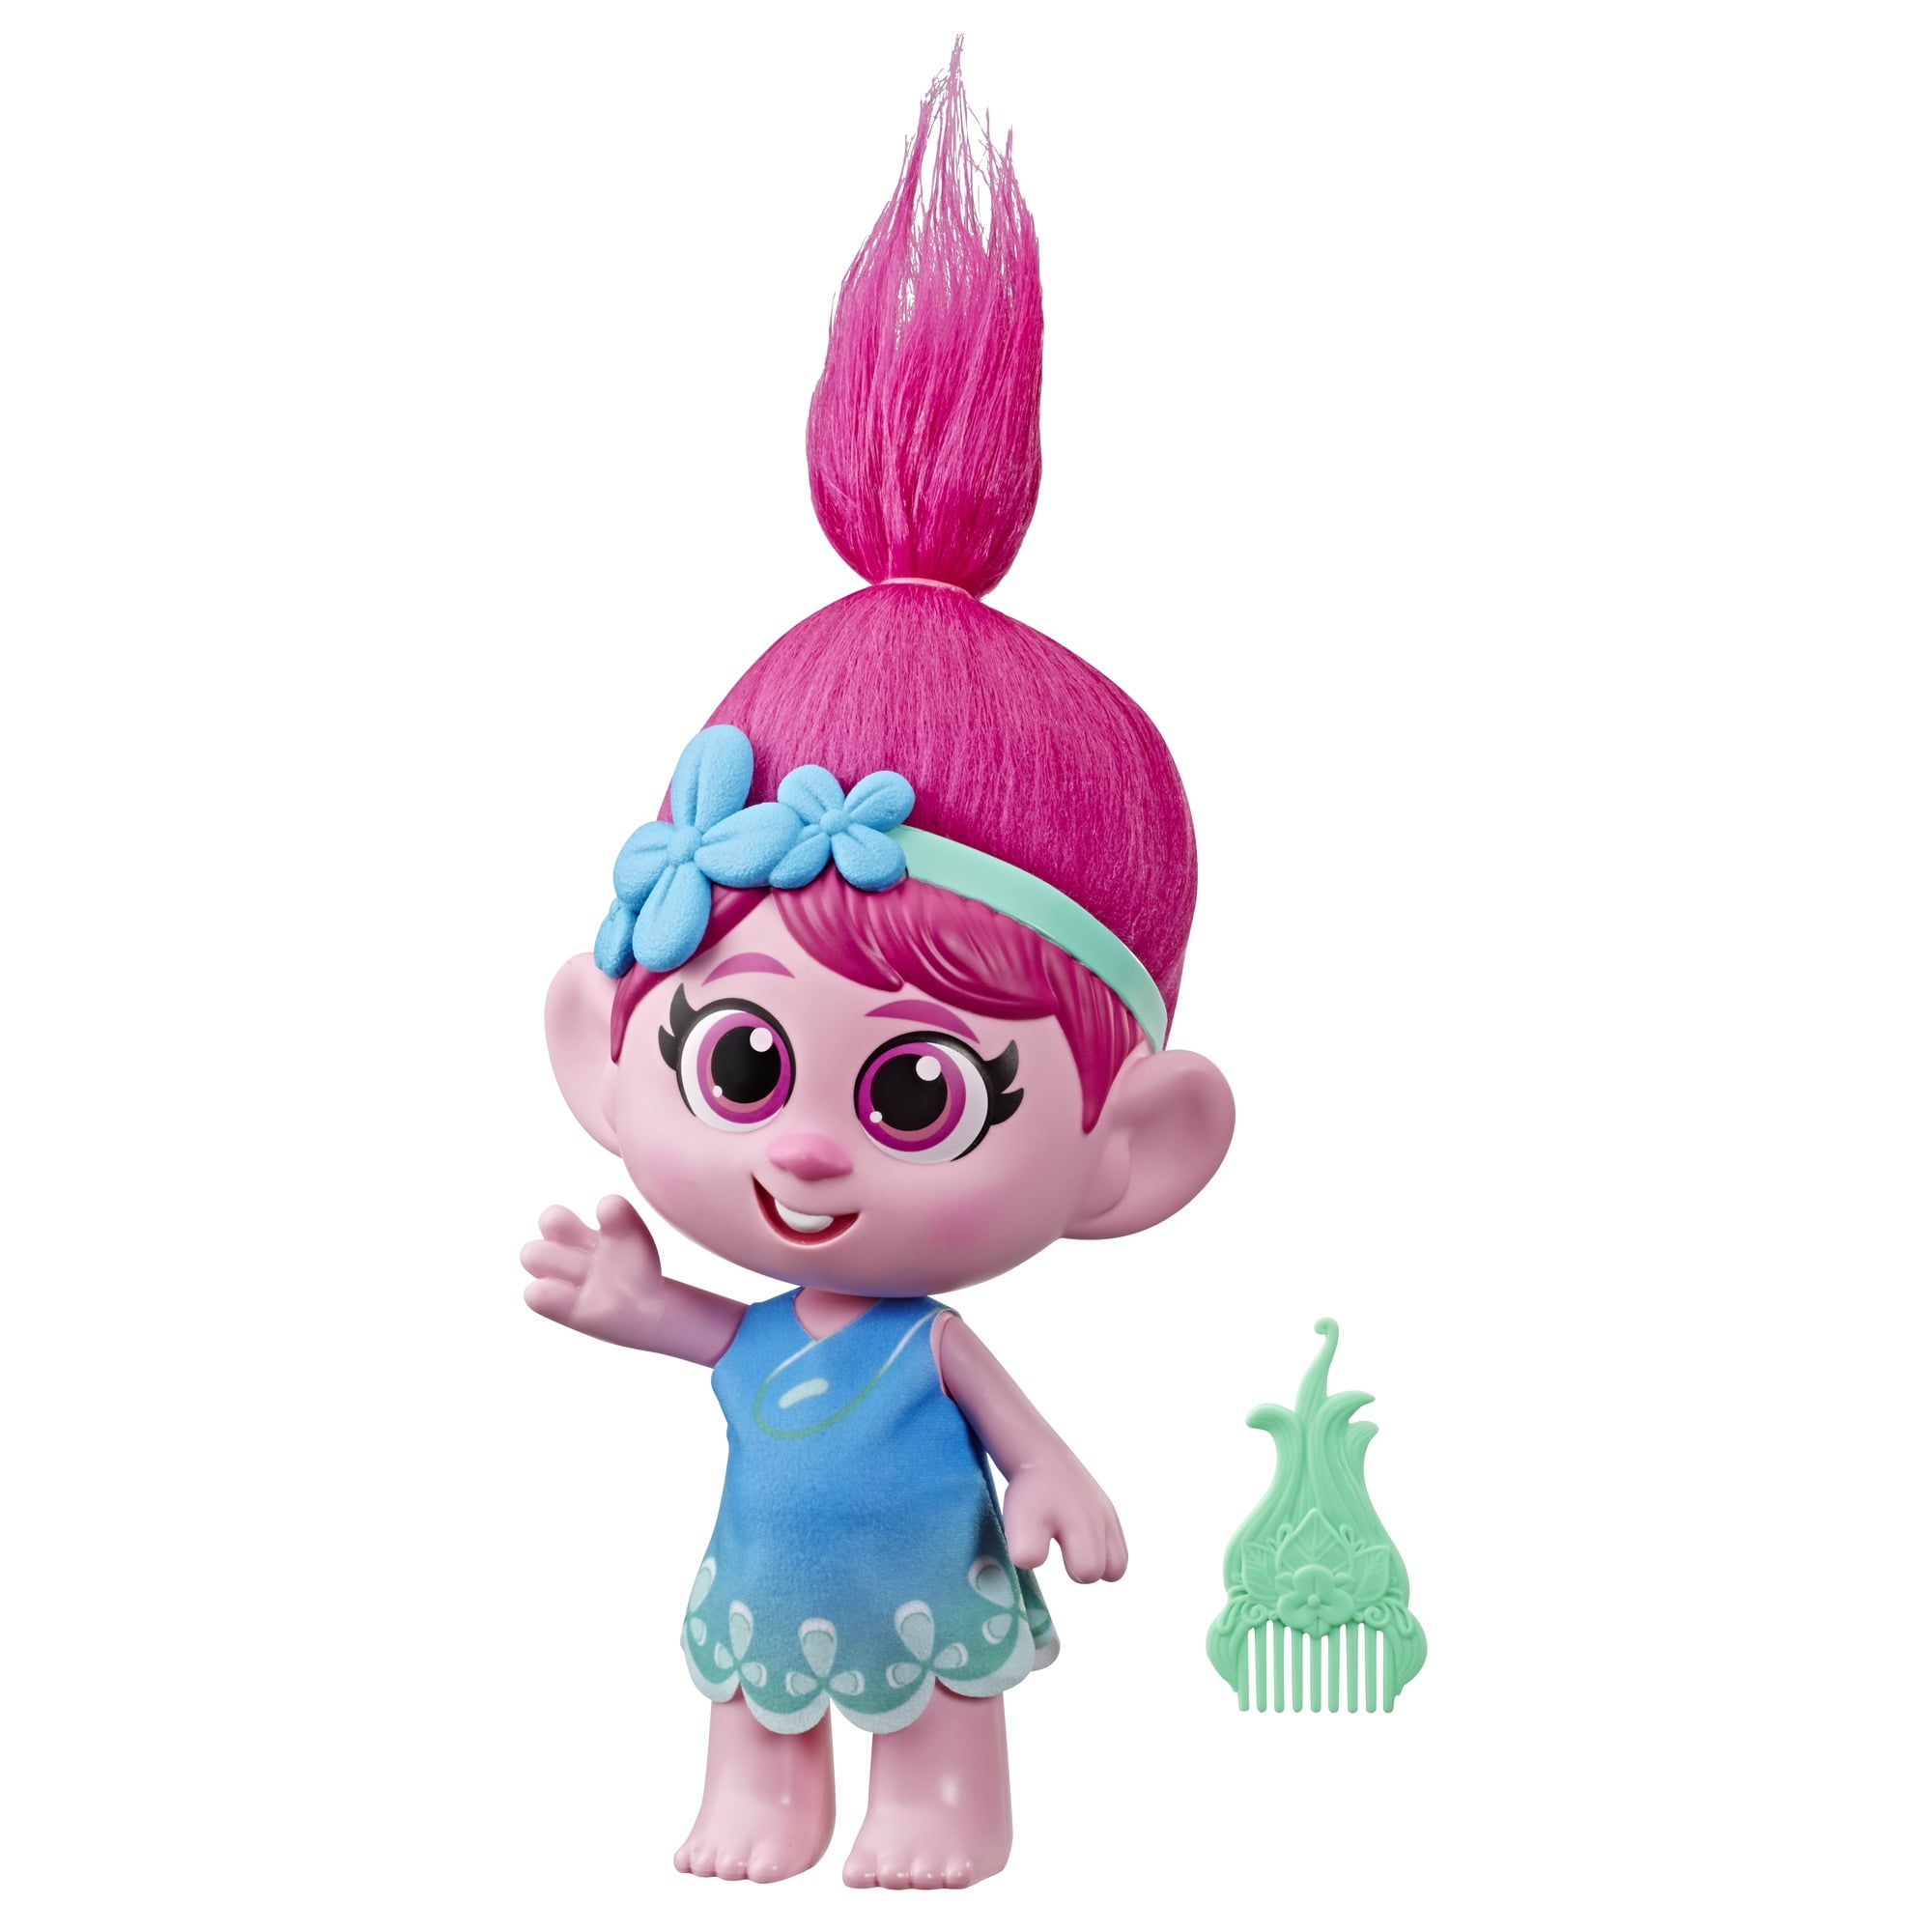 Details about   DreamWorks Trolls Stylin' Poppy Fashion Doll with Removable Dress & Hair *30.5cm 